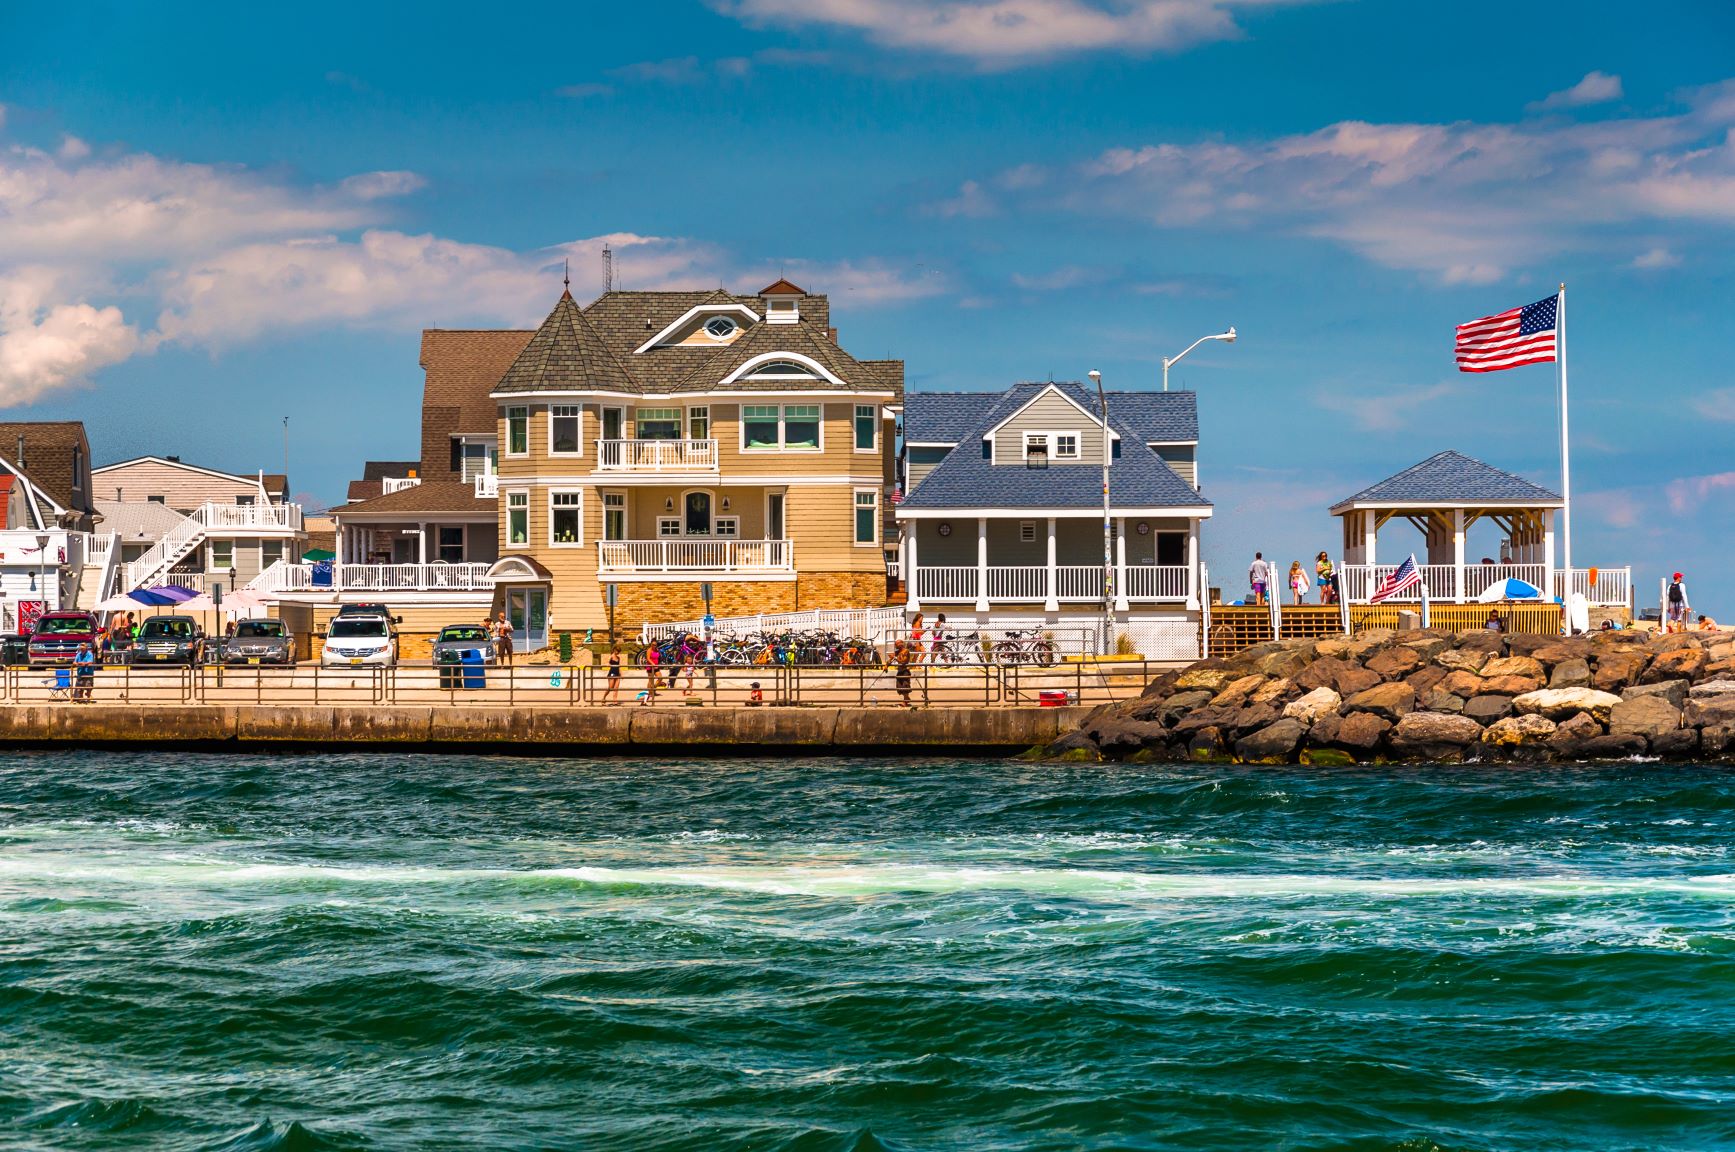 Can I start booking my summer rental home?